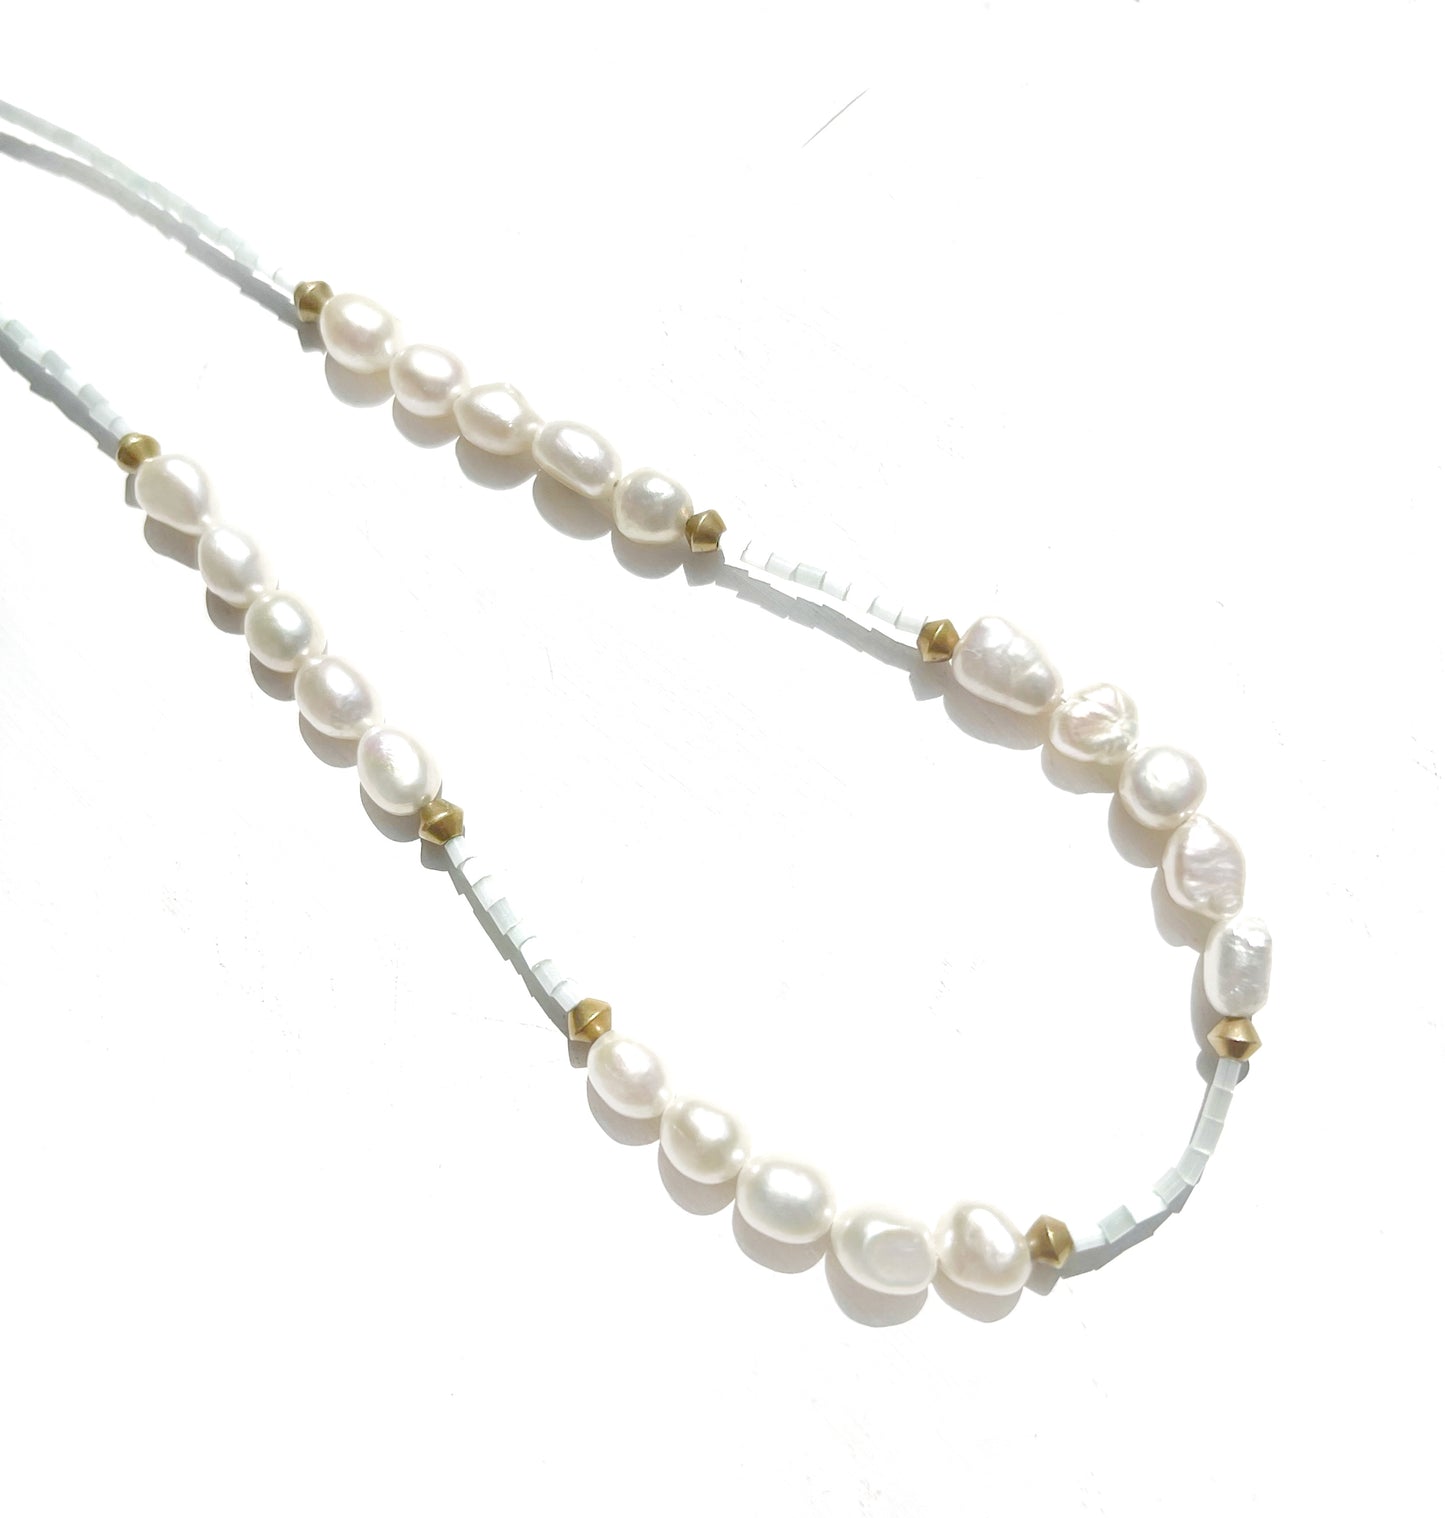 Dainty seed bead white freshwater pearl beaded choker necklace, delicate summer jewelry, boho beach choker, unique baroque pearl jewelry